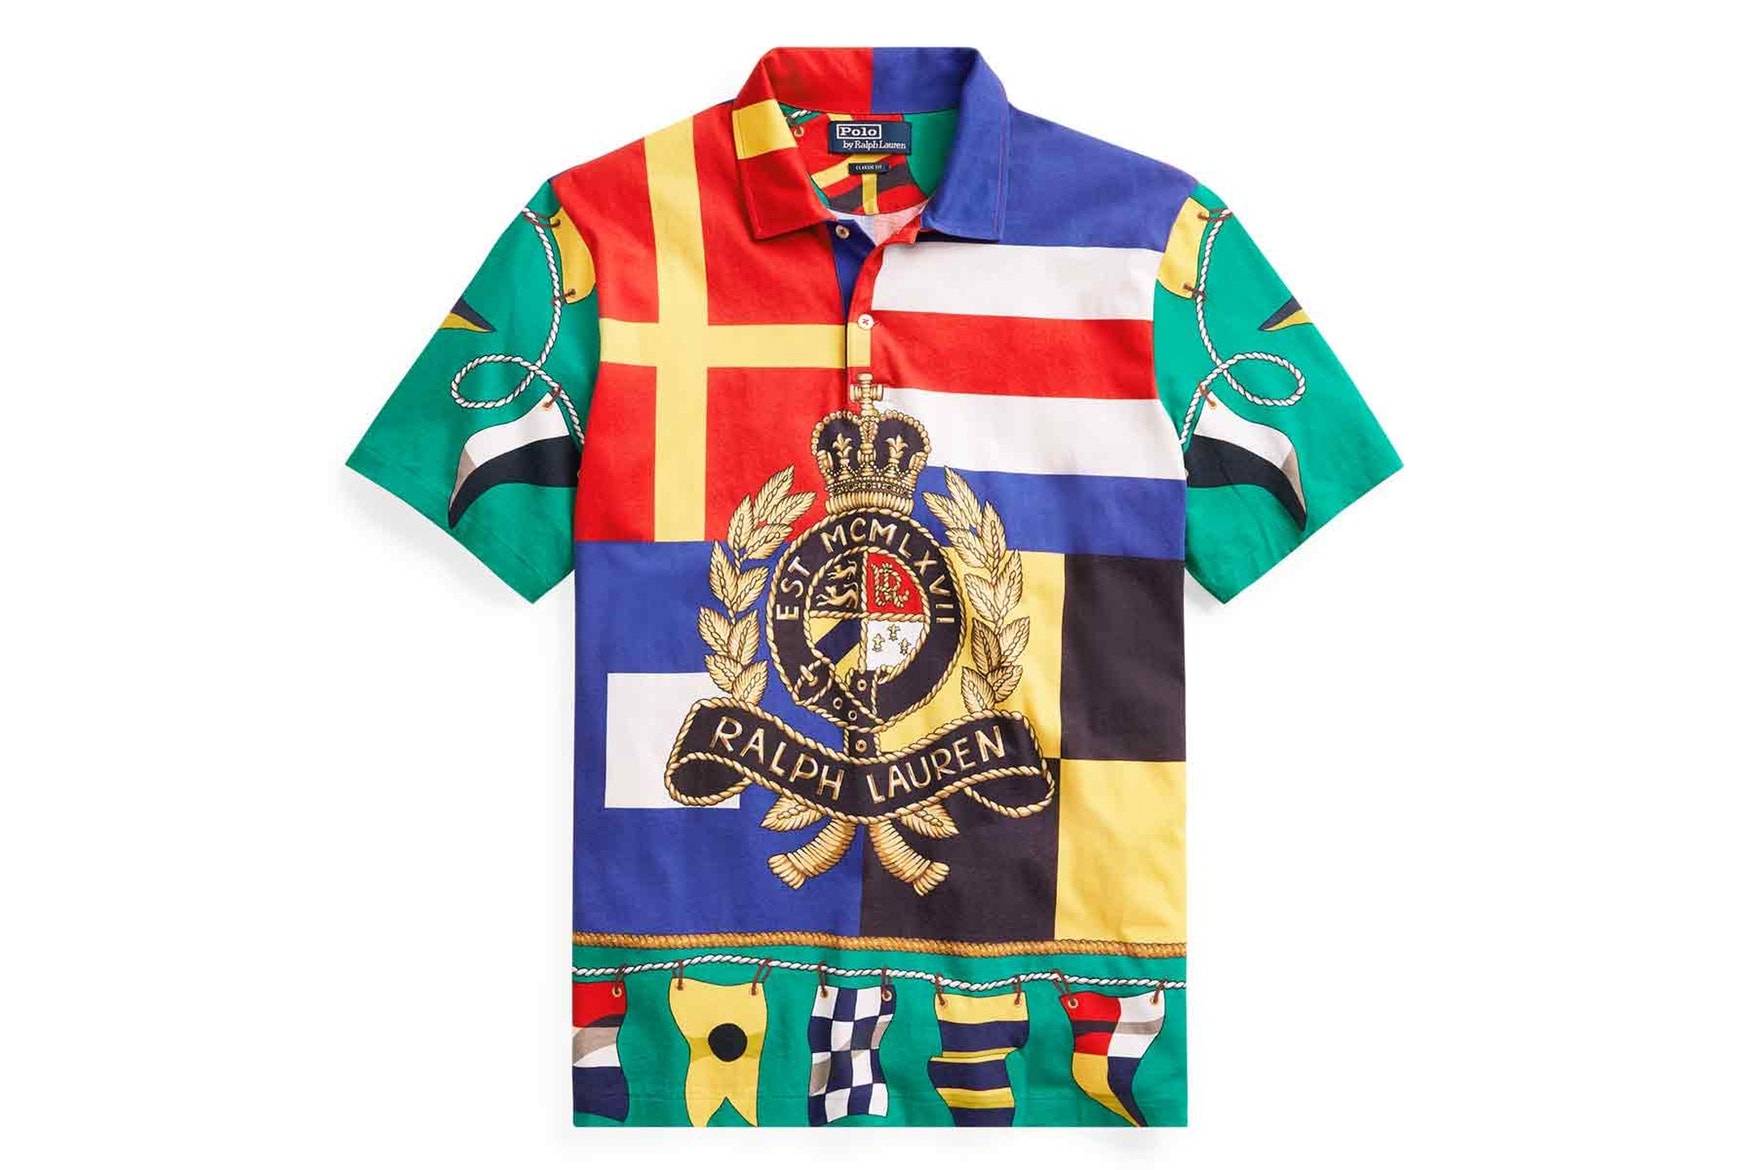 Polo by Ralph Lauren Limited Edition CP-93 Collection America's Cup